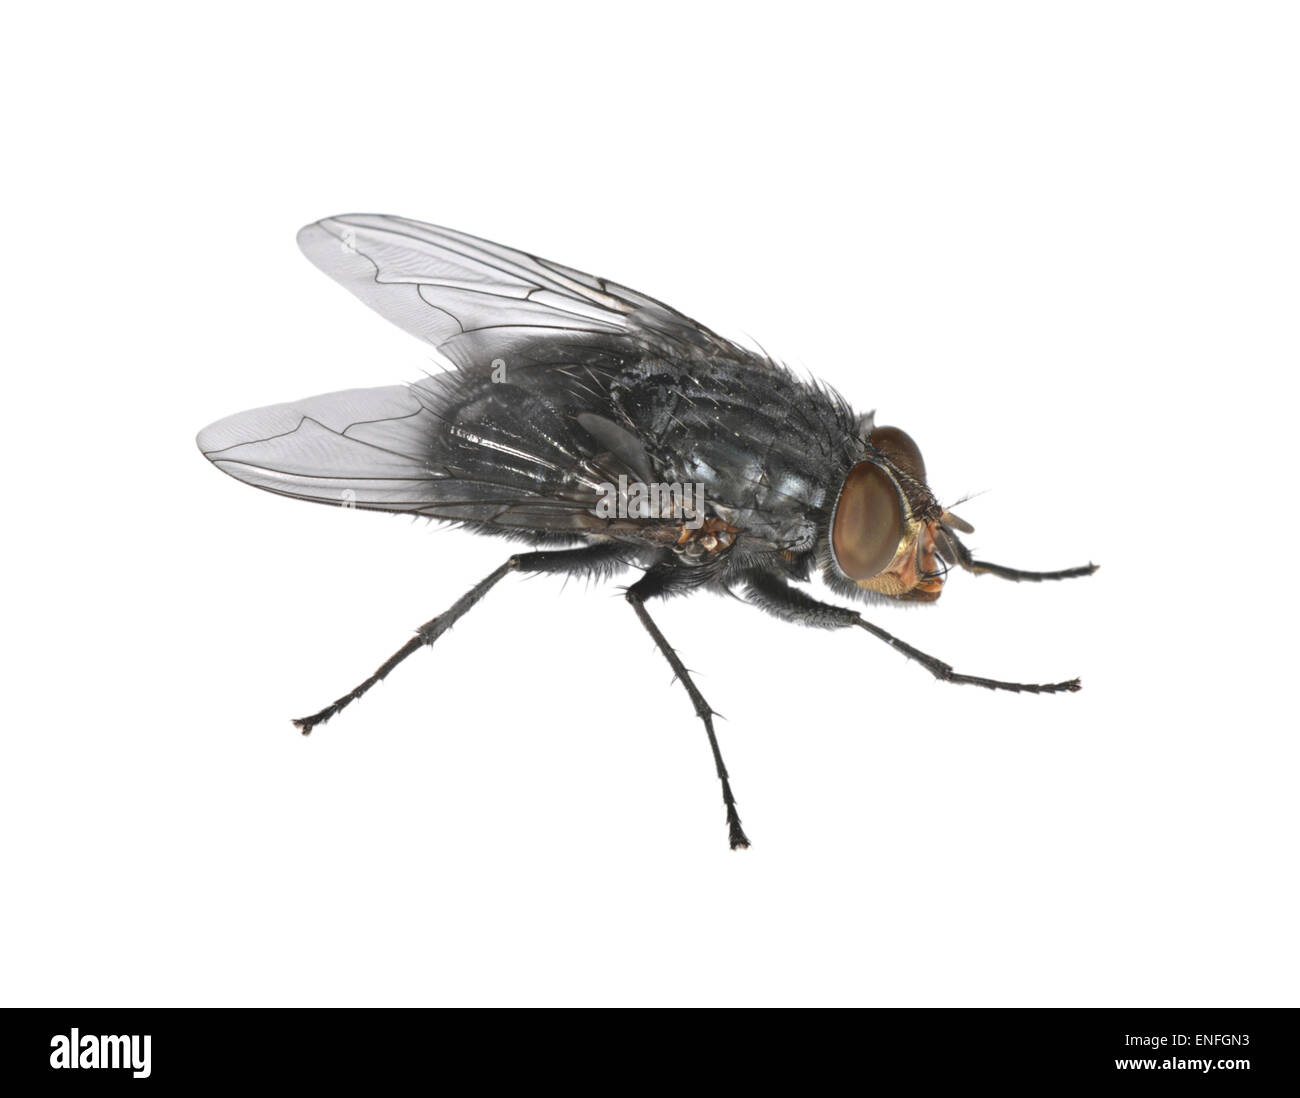 Common House-fly - Musca domestica Stock Photo